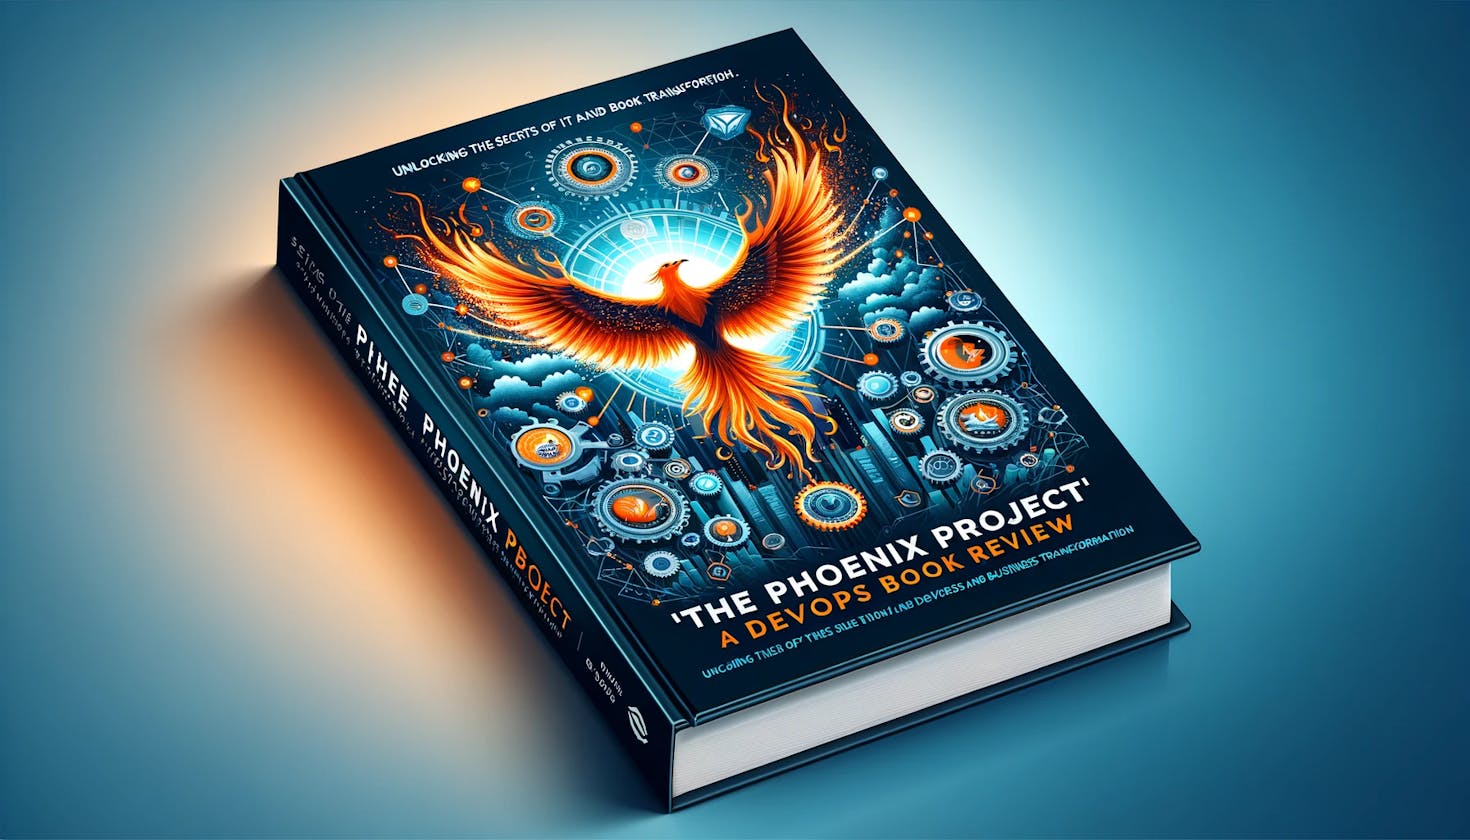 Navigating the IT Maze: A Layman's Journey Through "The Phoenix Project"